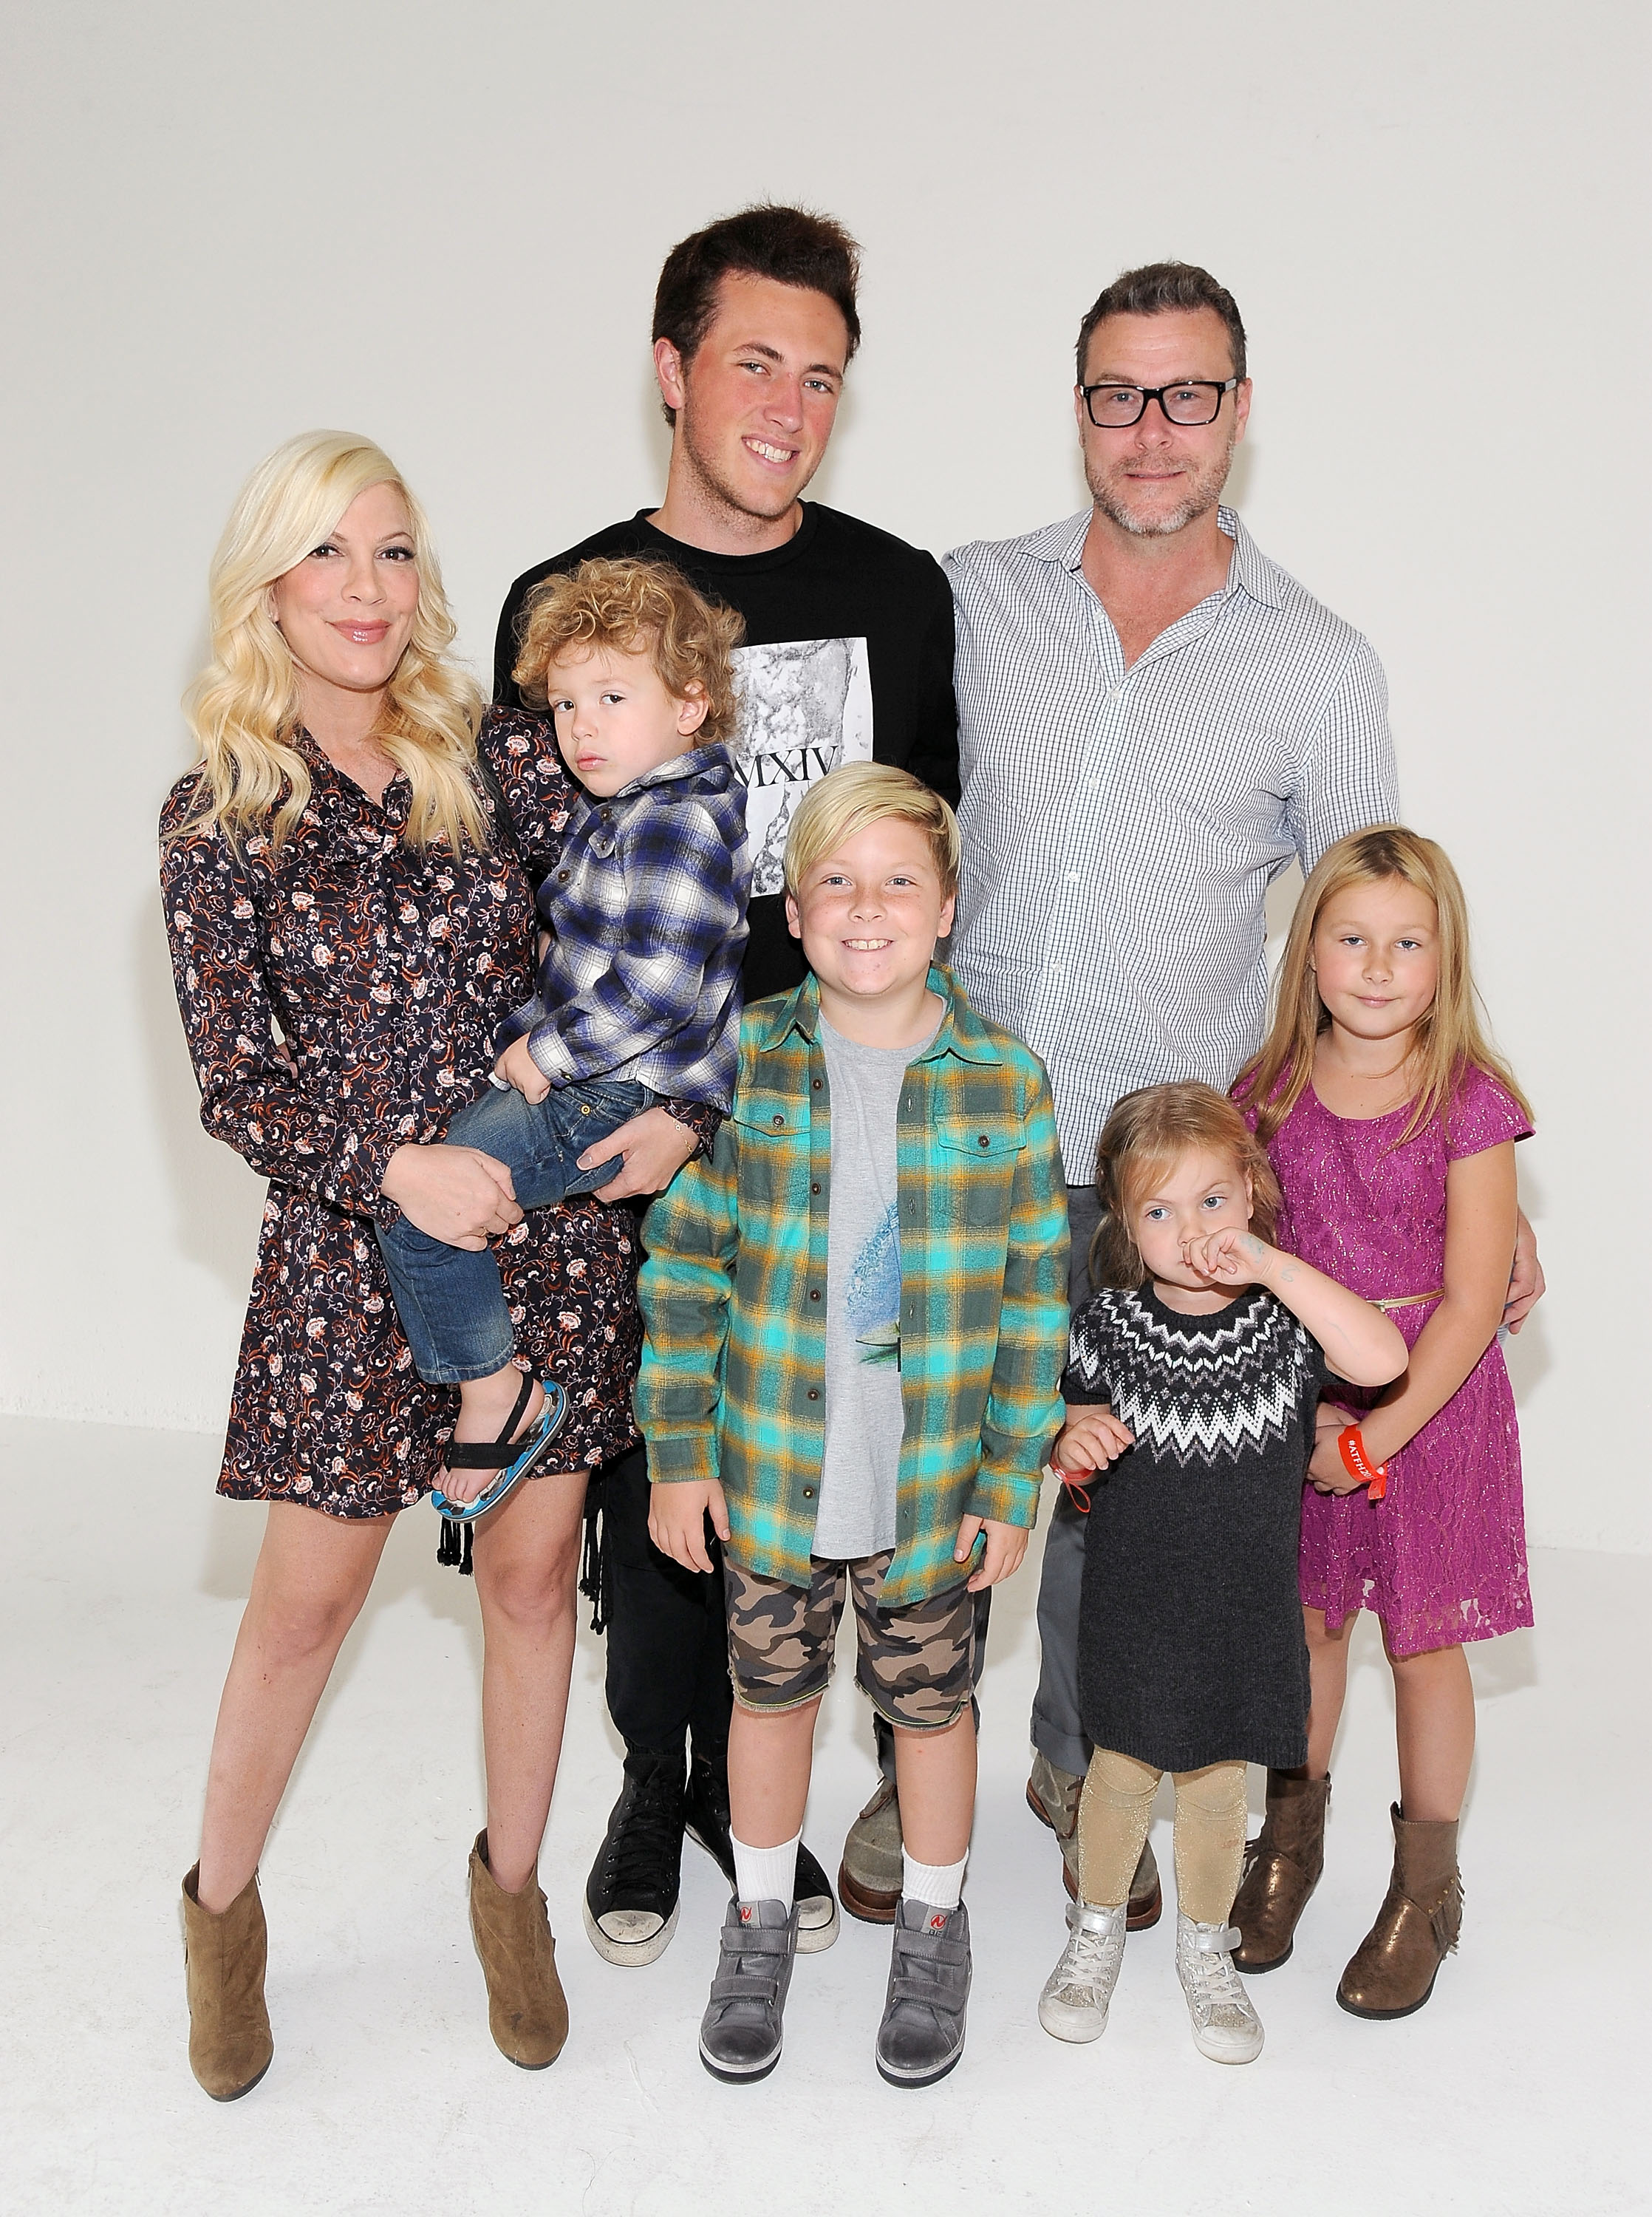 ori Spelling and Dean McDermott with their children attend the Elizabeth Glaser Pediatric AIDS Foundation's 26th Annual A Time For Heroes Family Festival in California, on October 25, 2015. | Source: Getty Images